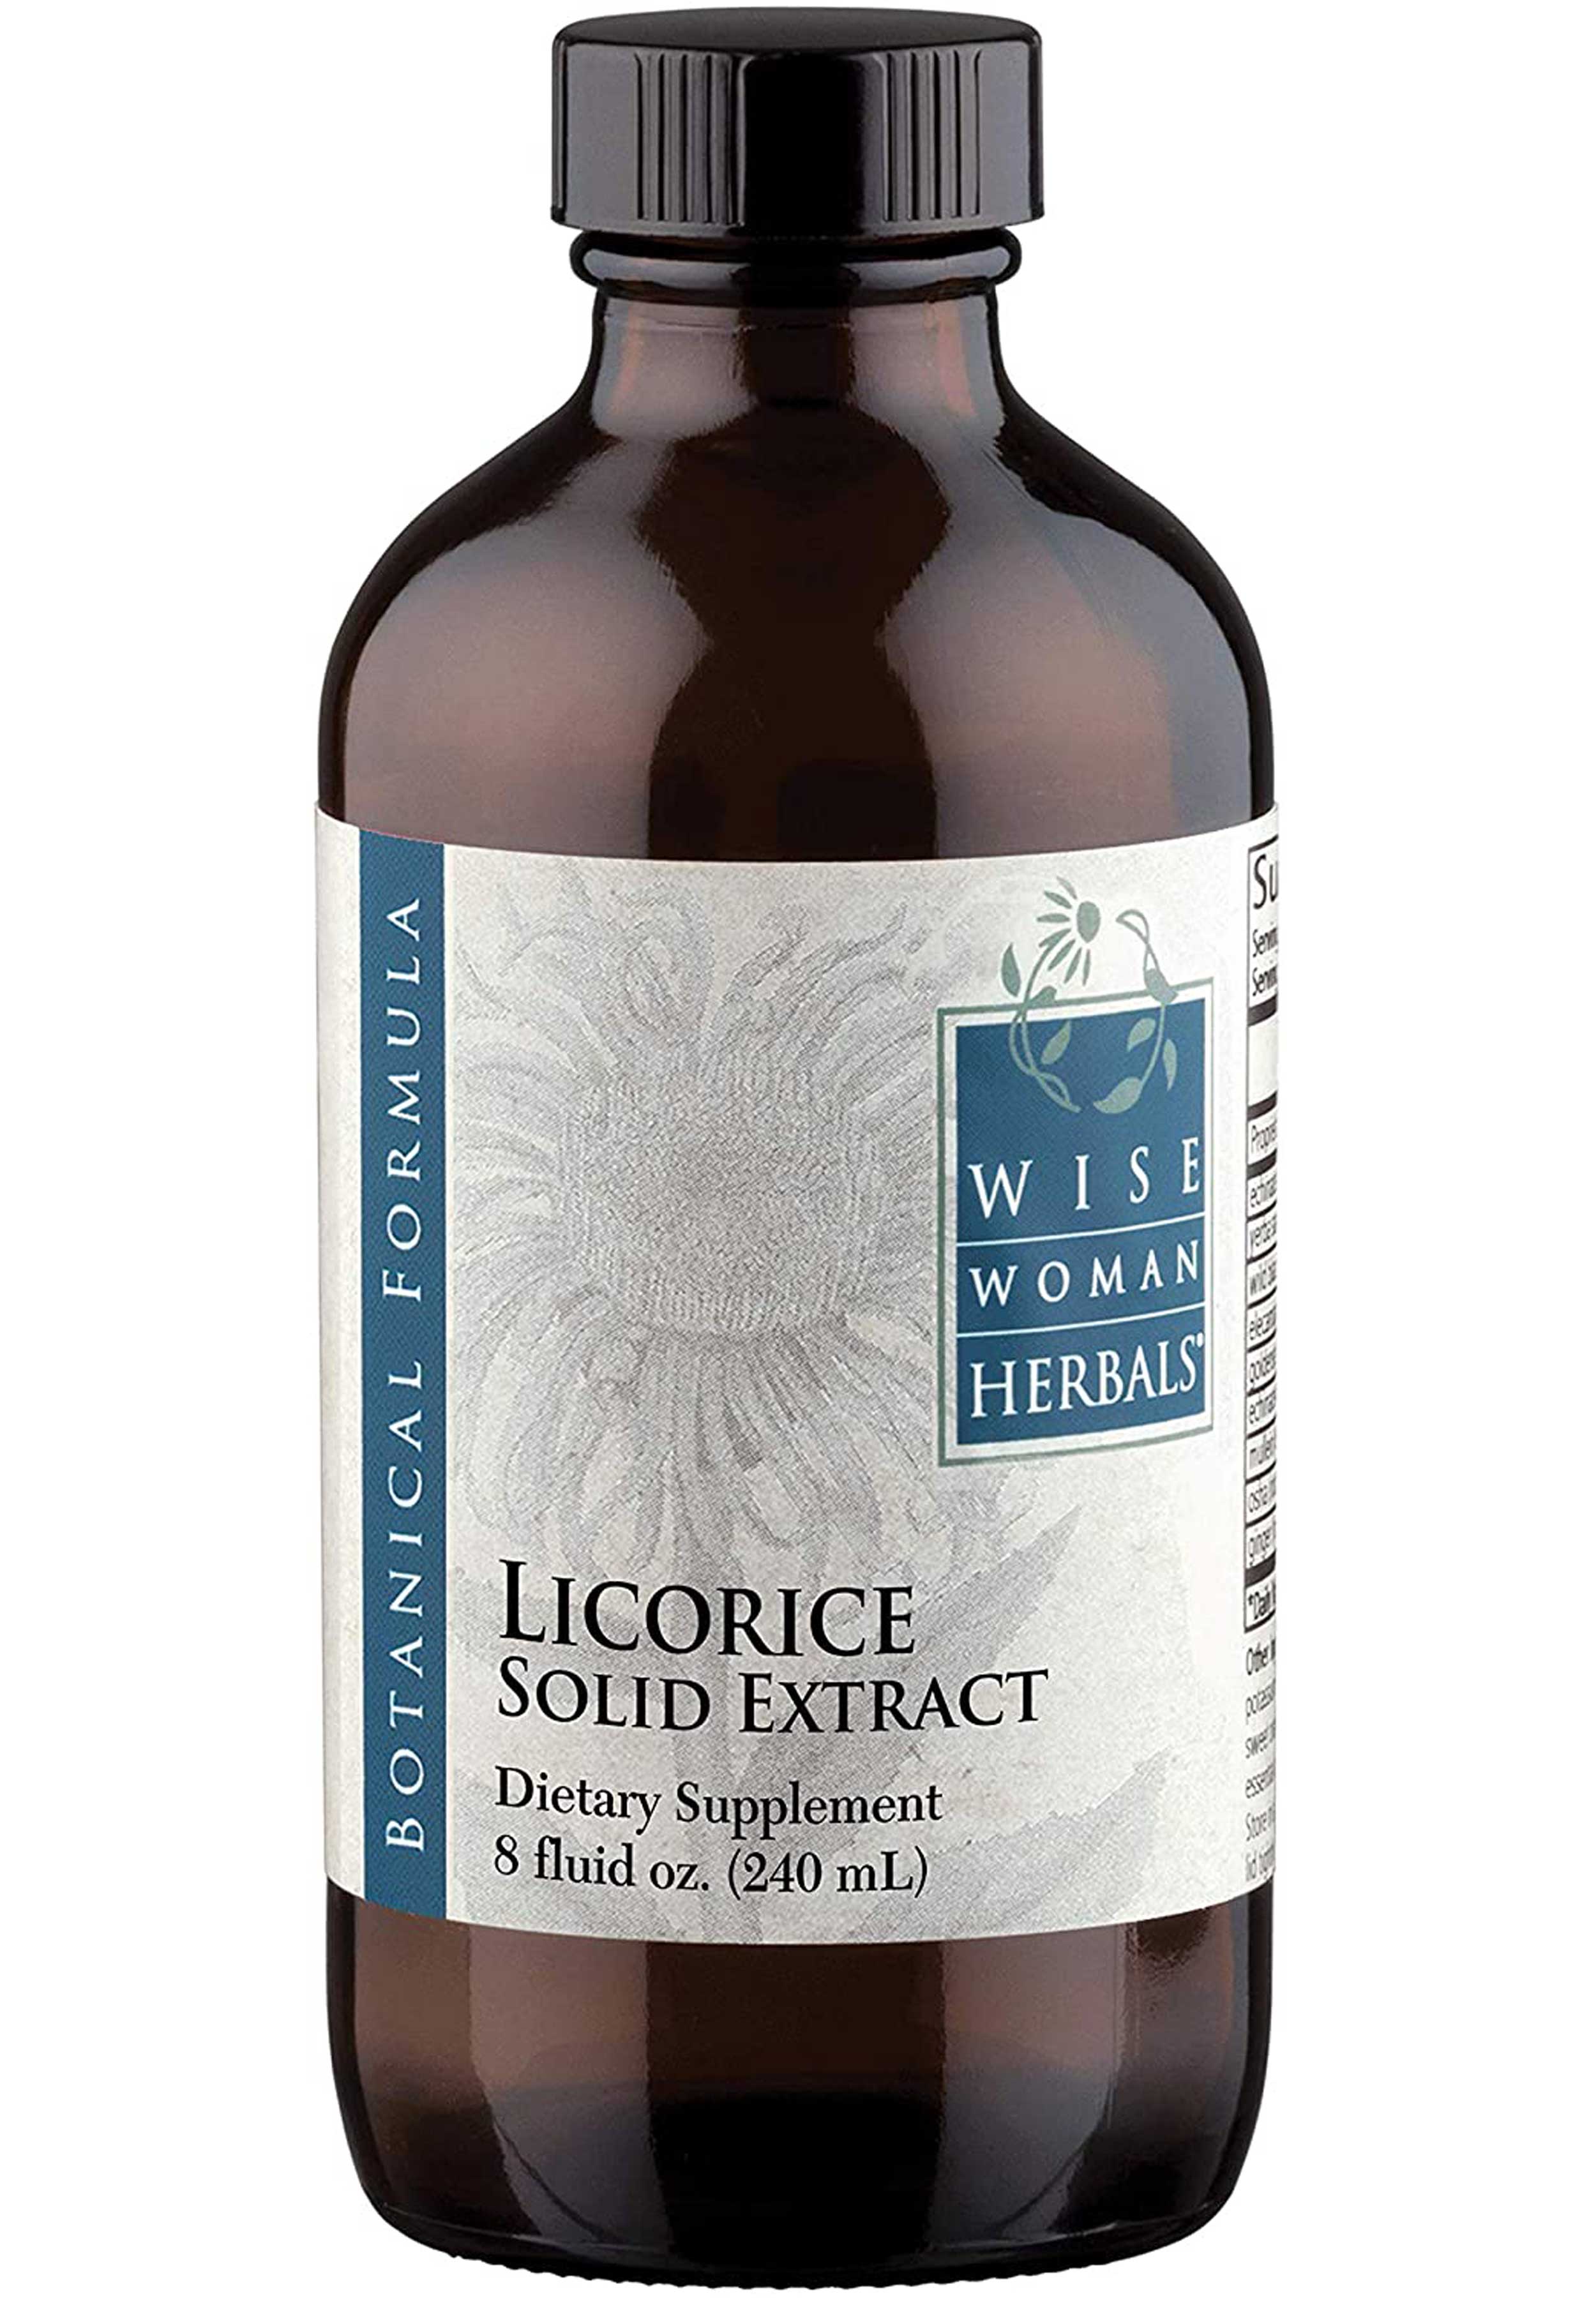 Wise Woman Herbals Licorice Solid Extract